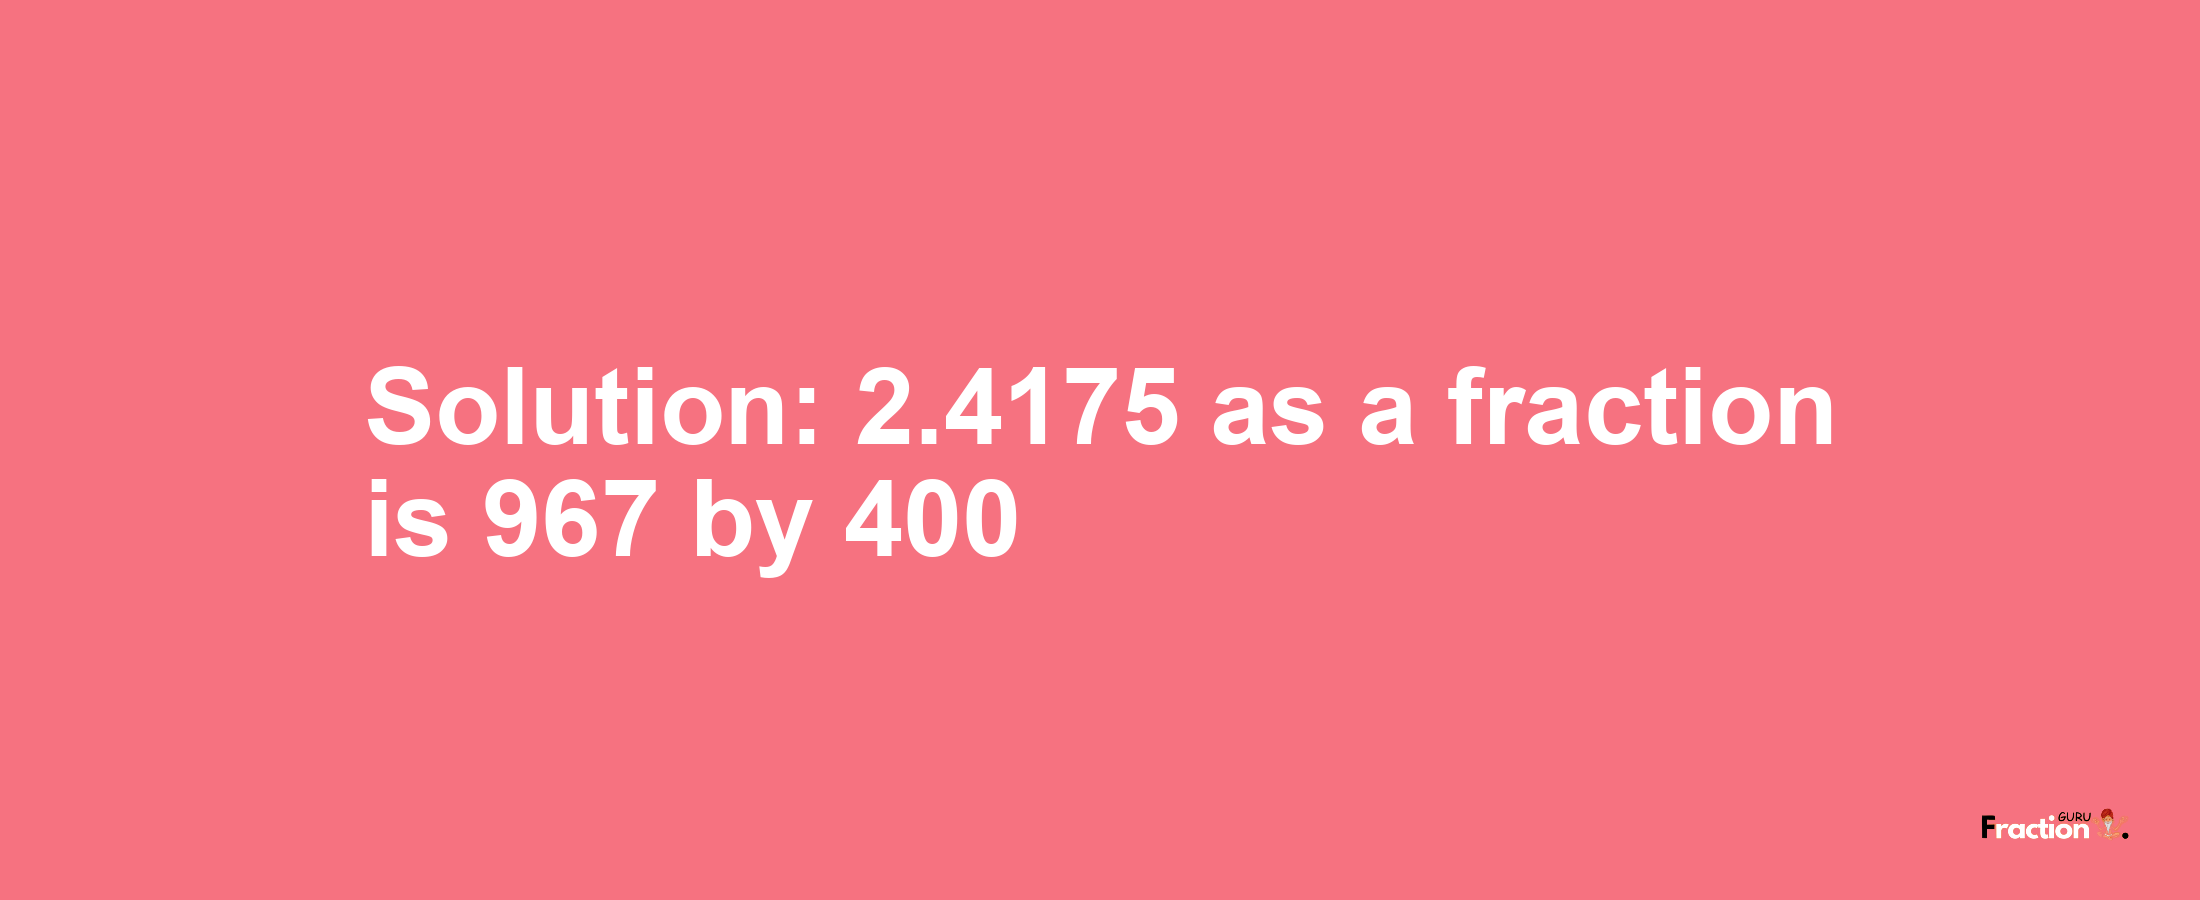 Solution:2.4175 as a fraction is 967/400